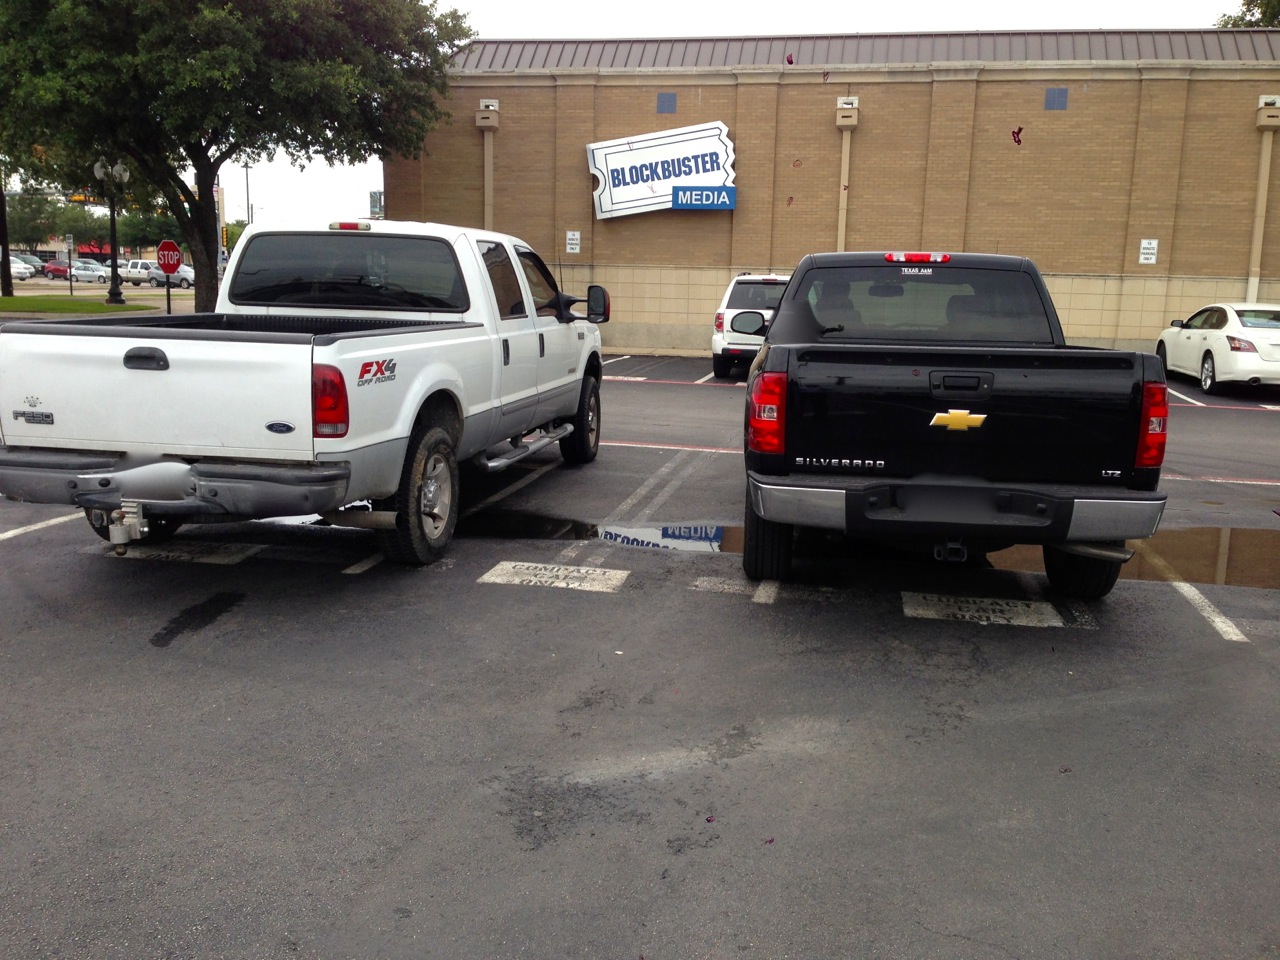 Check out this sloppy parking job at Greenville & Lovers. Think the drivers didn't realize they were straddling the line?